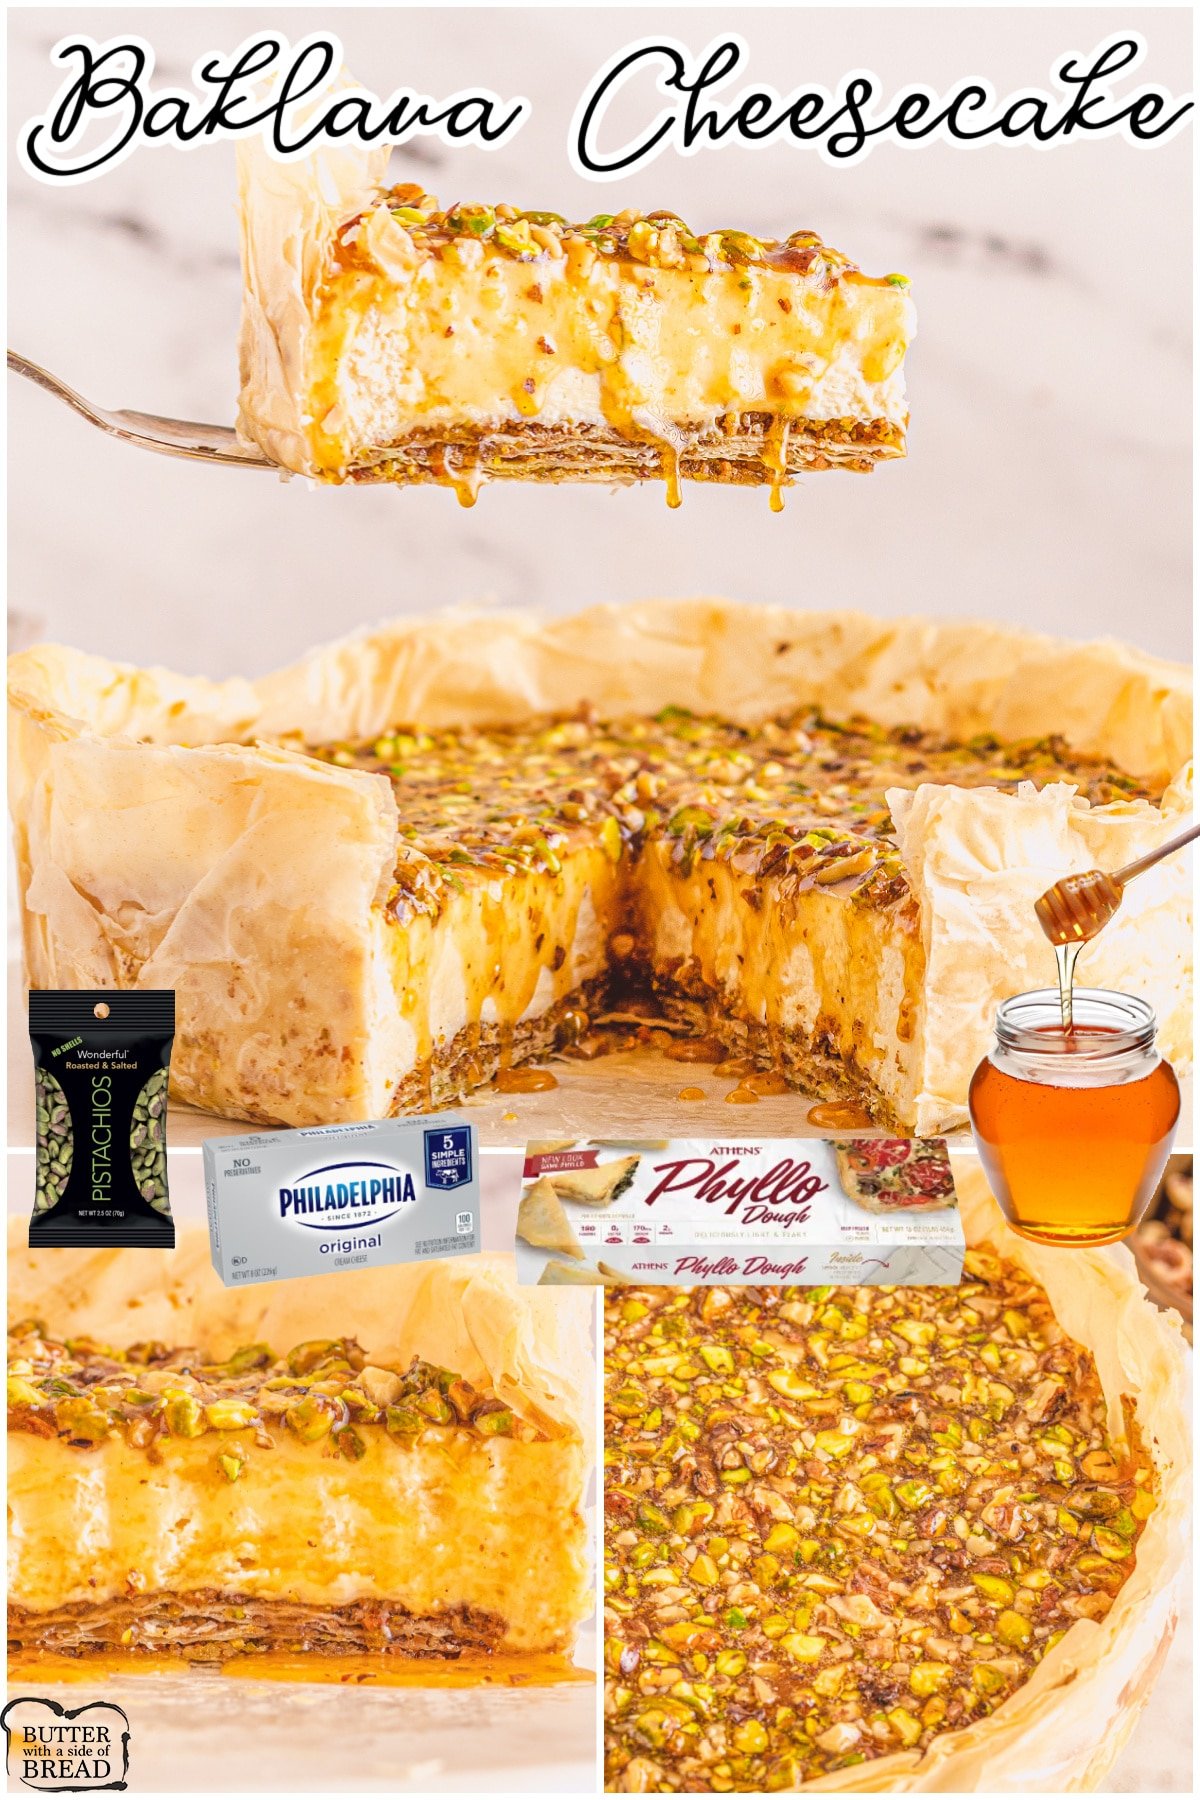 Baklava Cheesecake is everything you love about Baklava in cheesecake form! This Greek Baklava cheesecake is a perfect blend of buttery phyllo dough, sweet honey, crunchy nuts, and creamy rich cheesecake!